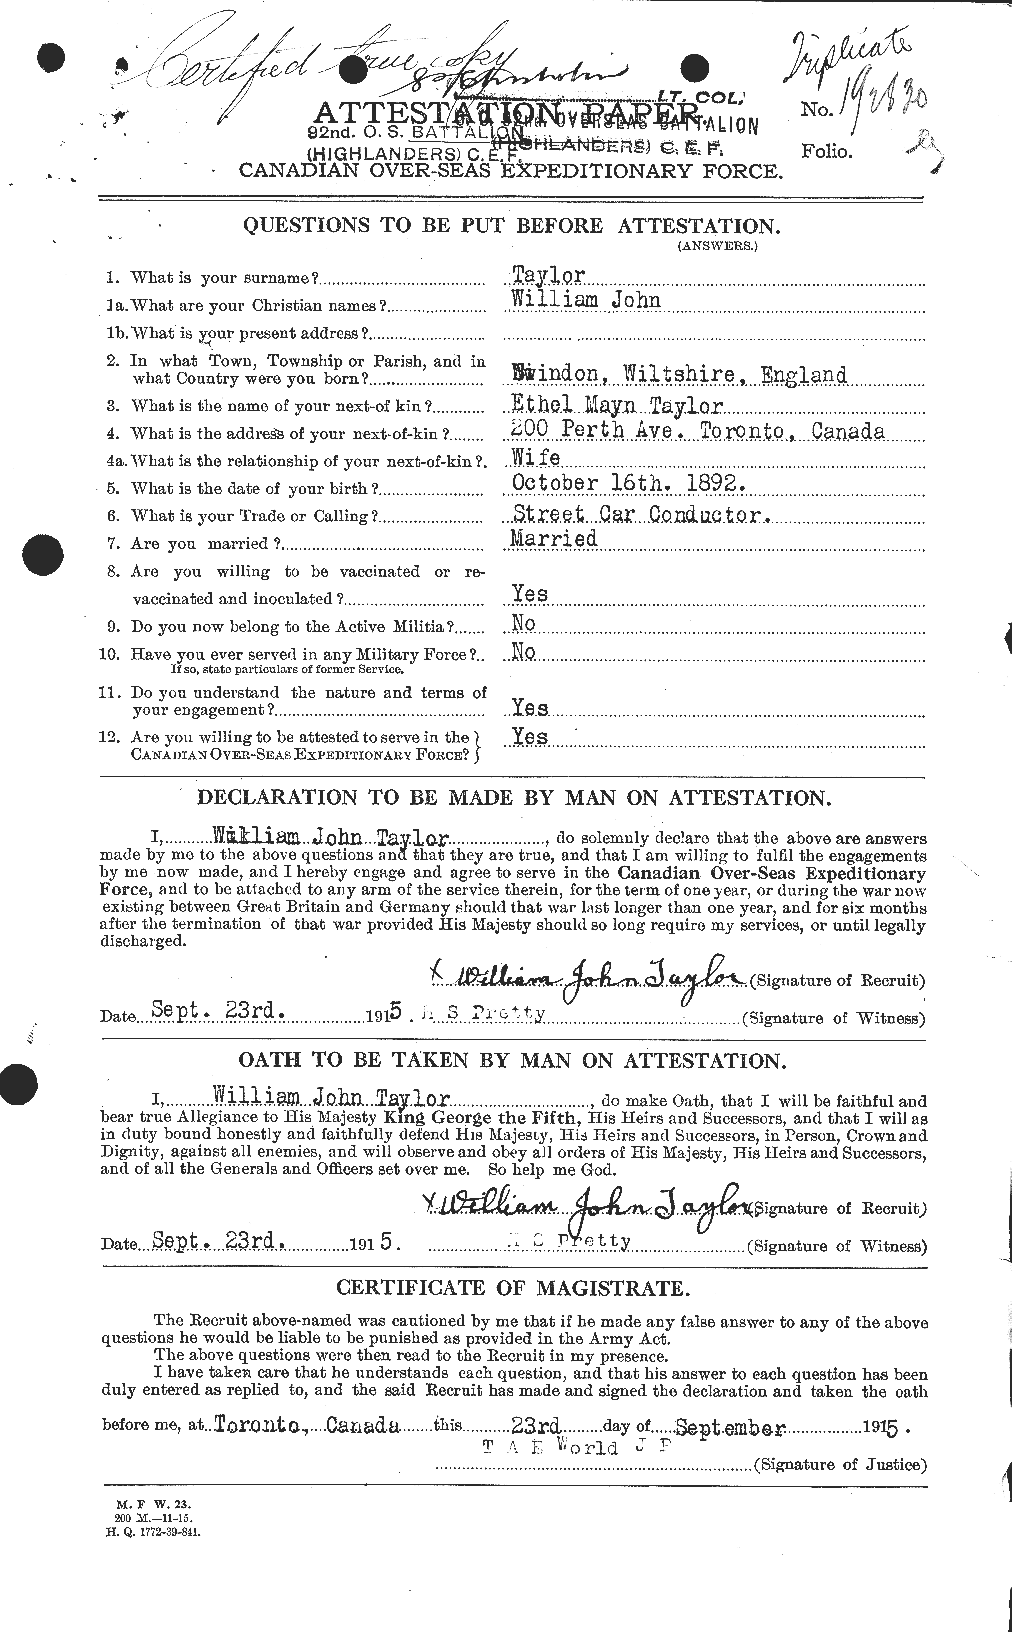 Personnel Records of the First World War - CEF 628307a